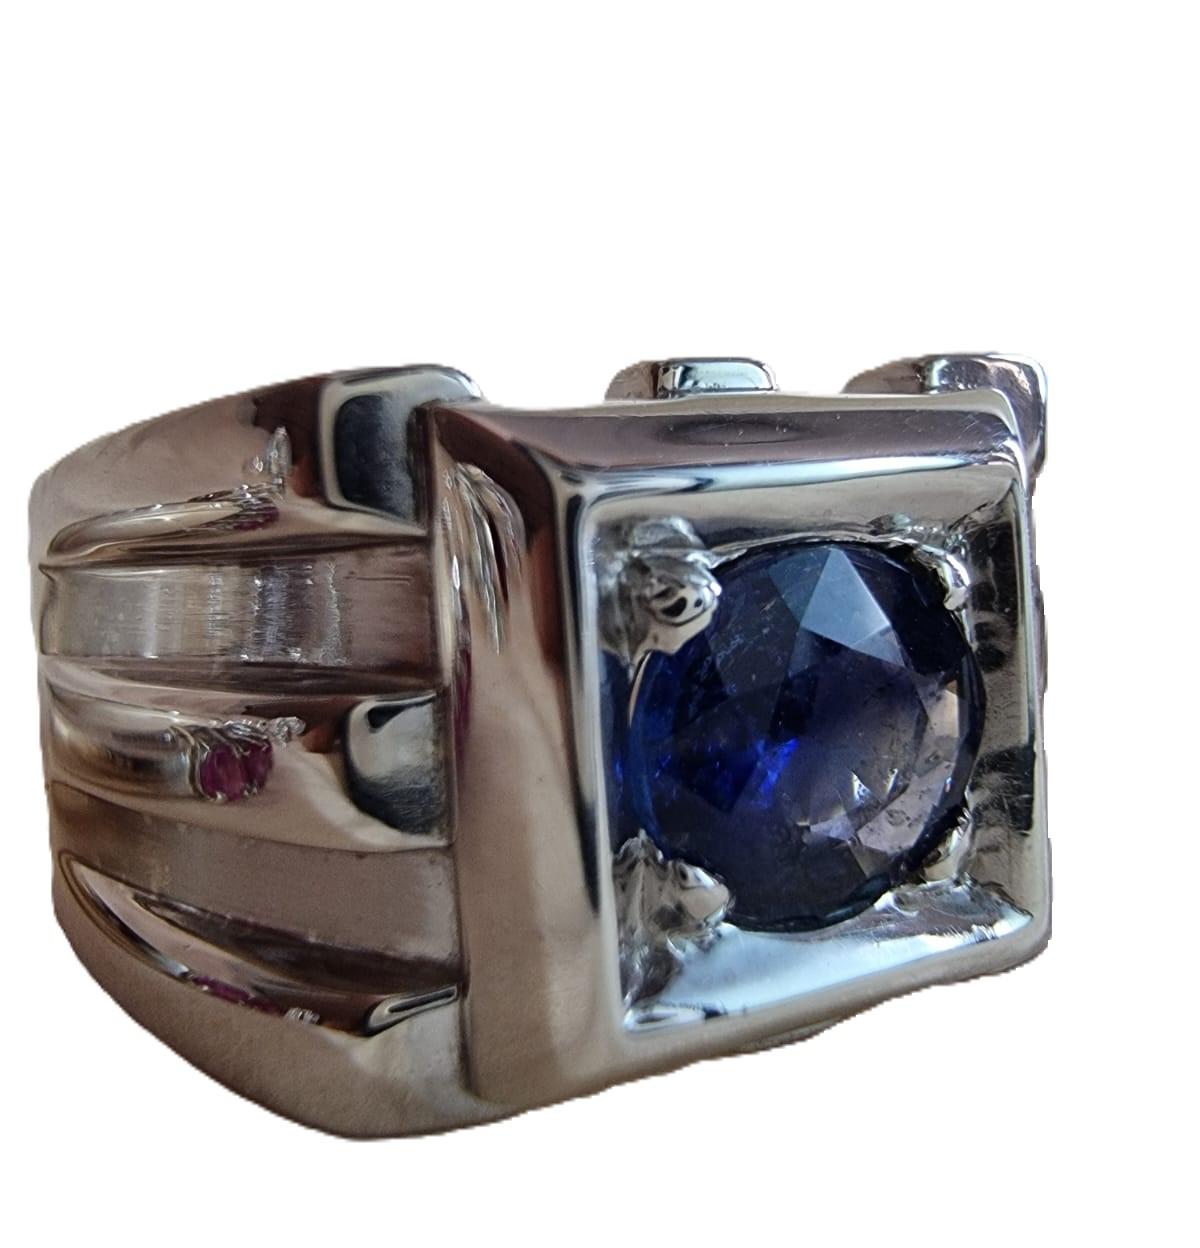 Introducing our 1.5ct Round Cut Natural Blue Sapphire Signet Platinum Silver Ring—a masterful blend of sophistication and elegance.

Ring Details:
Gemstone: Round Cut Blue Sapphire
Carat Weight: 1.5 carats
Metal: Platinum Coated Sterling Silver
Ring